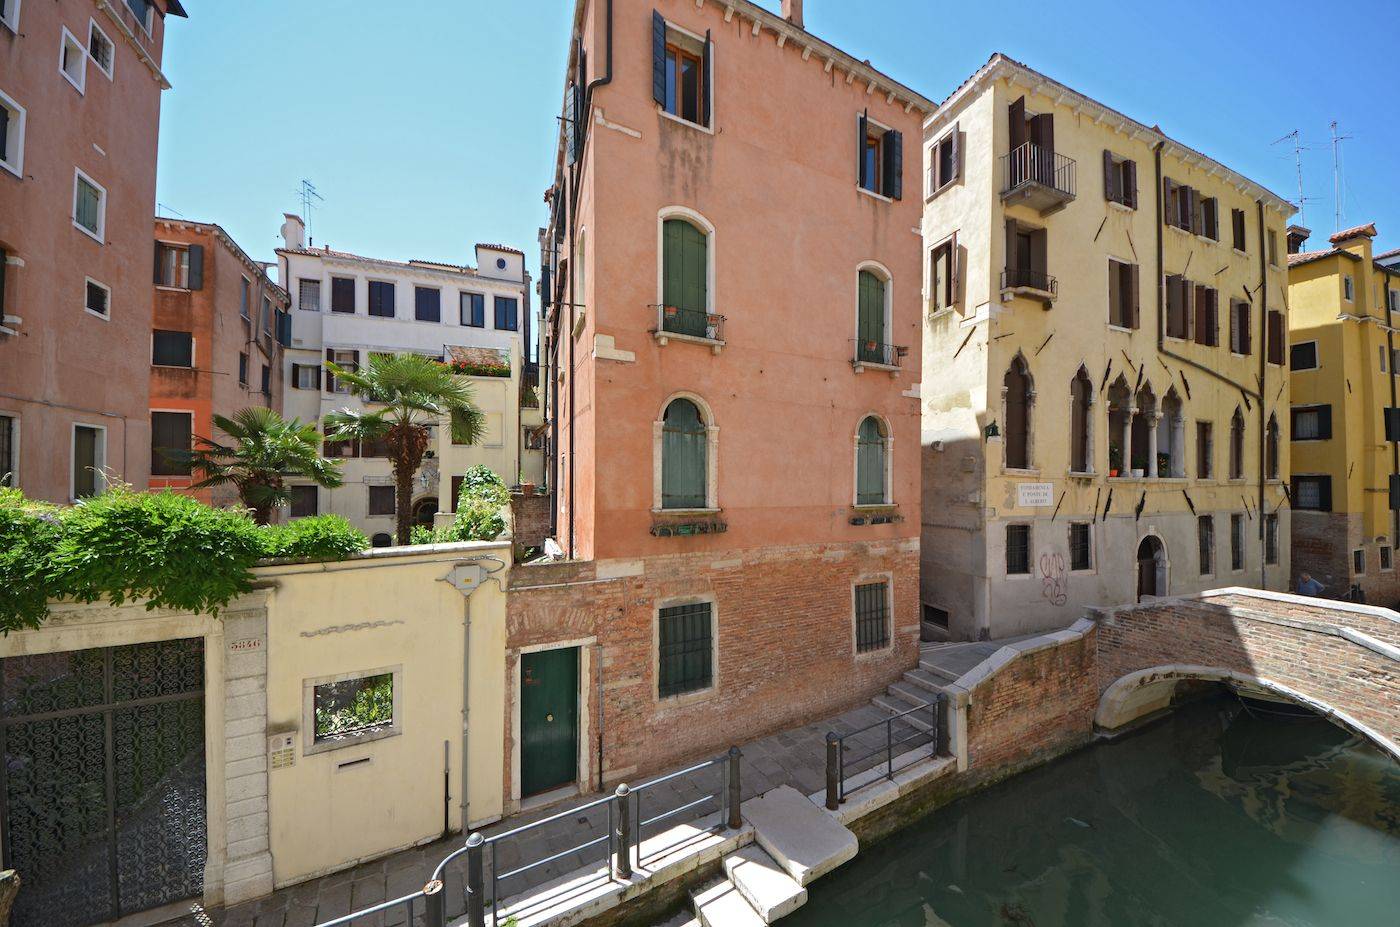  Apartment Accommodation Venice Italy Ideas in 2022